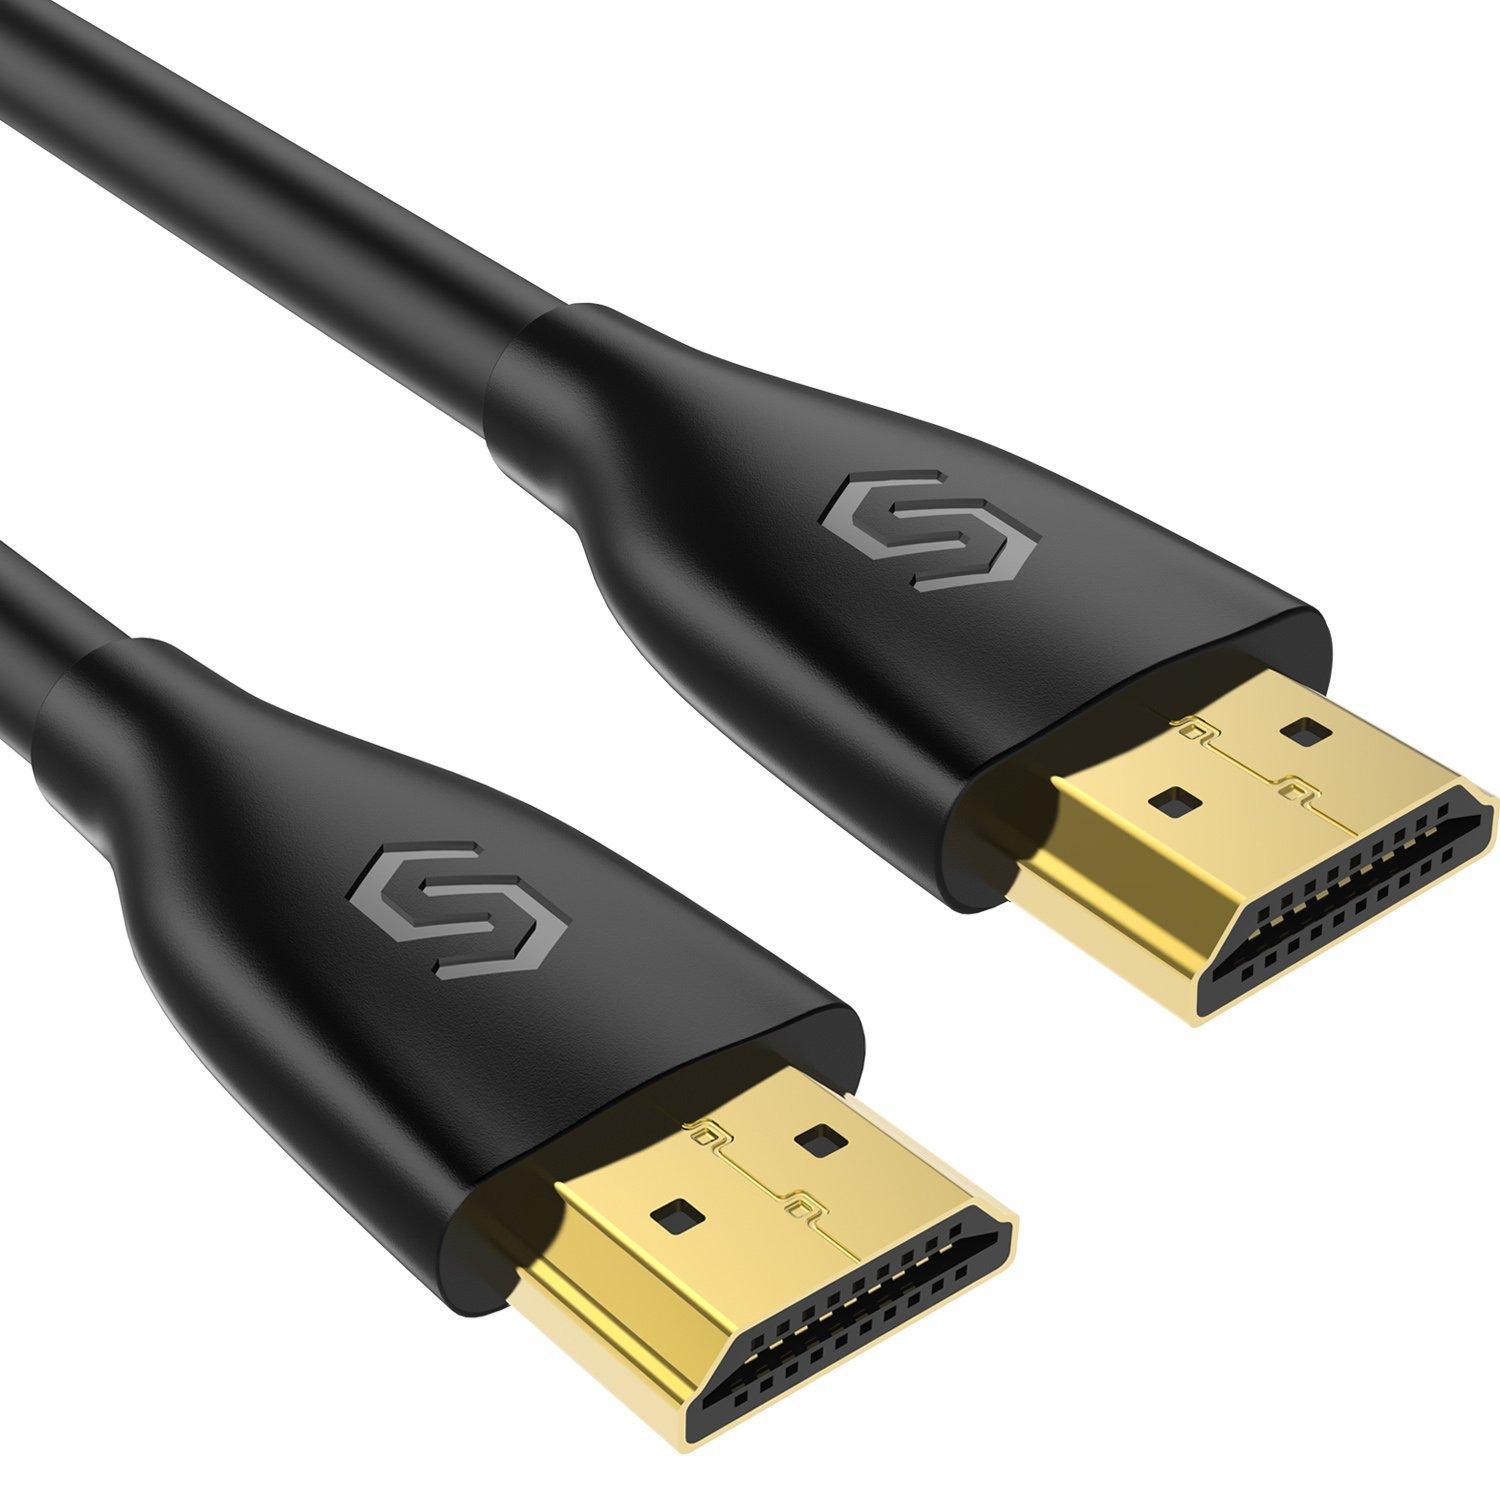 Syncwire HDMI Kabel - Meest Duurzaam